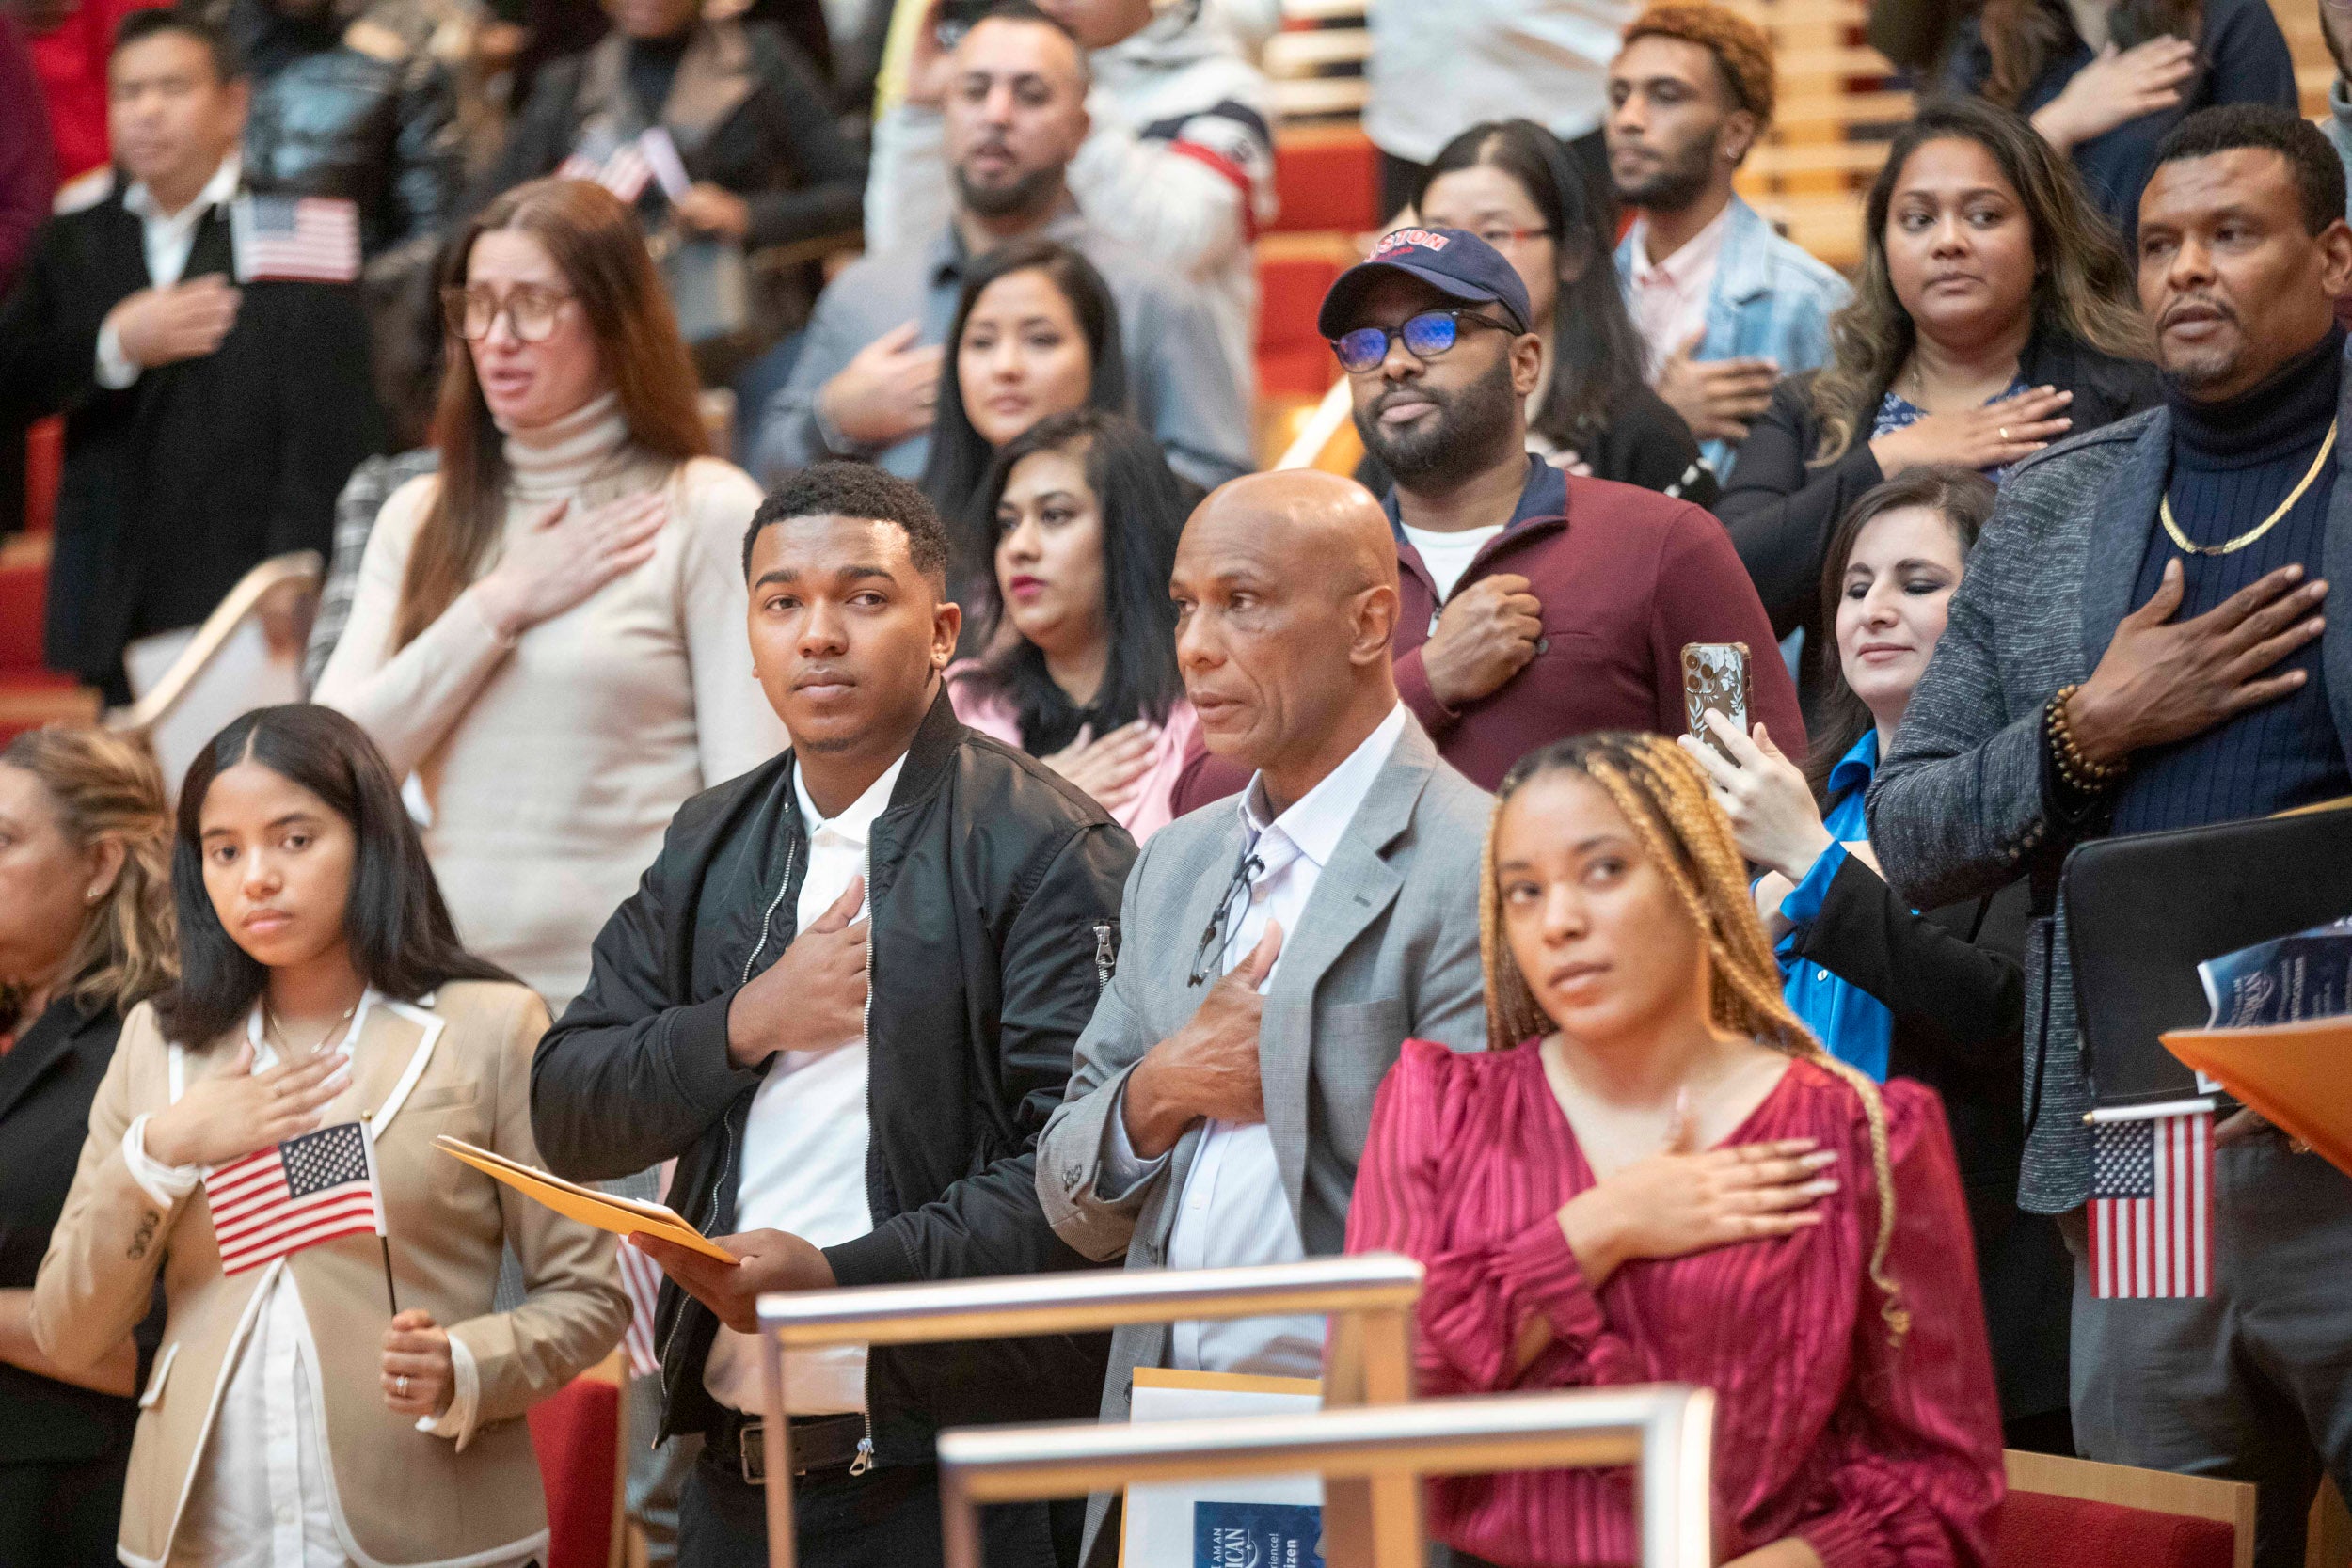 New citizens say Pledge of Allegiance during naturalization ceremony in Harvard's Klarman Hall.